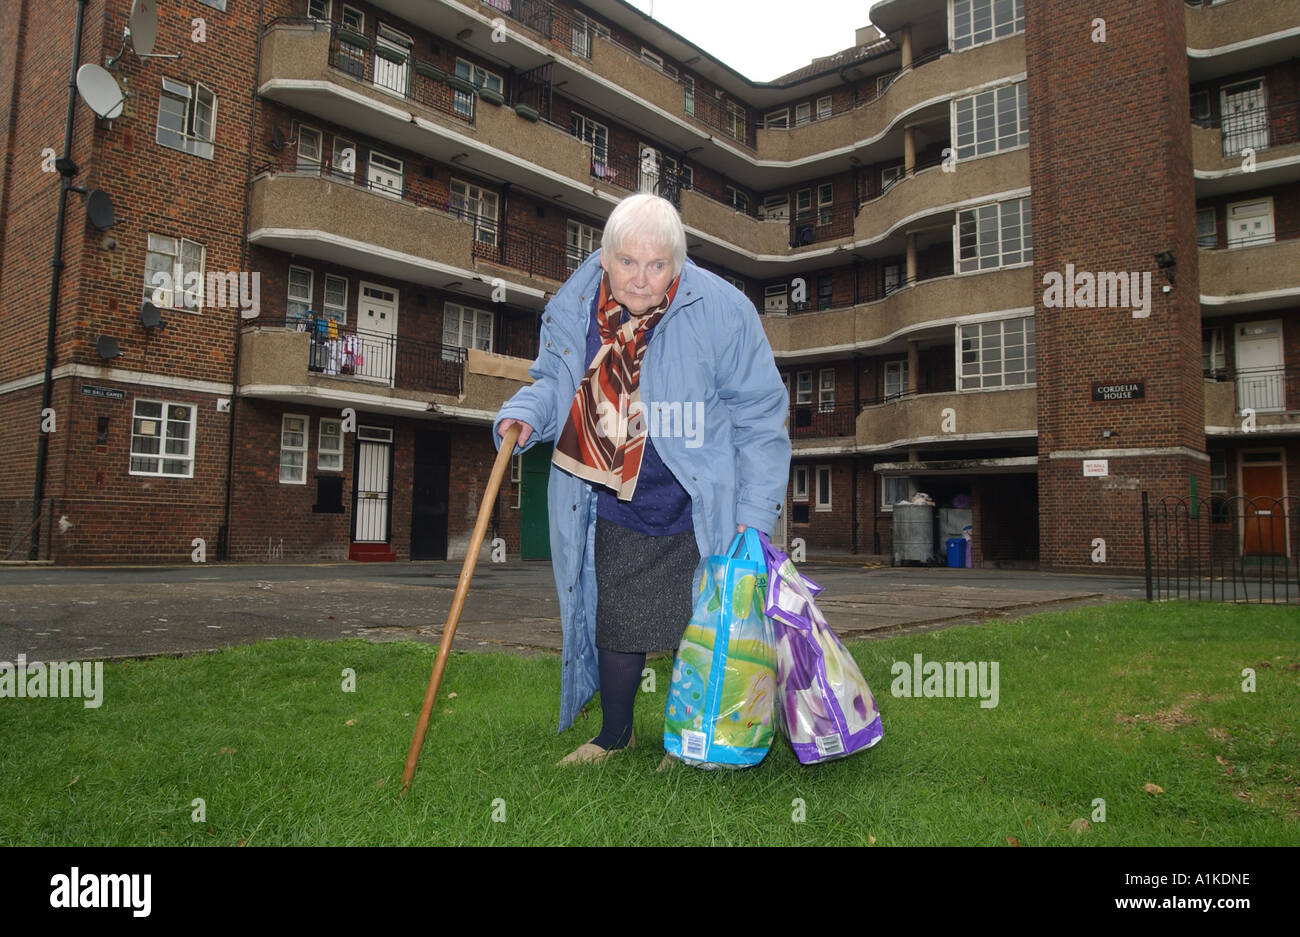 Elderly woman lady female carrying shopping bags on a London tower block Stock Photo